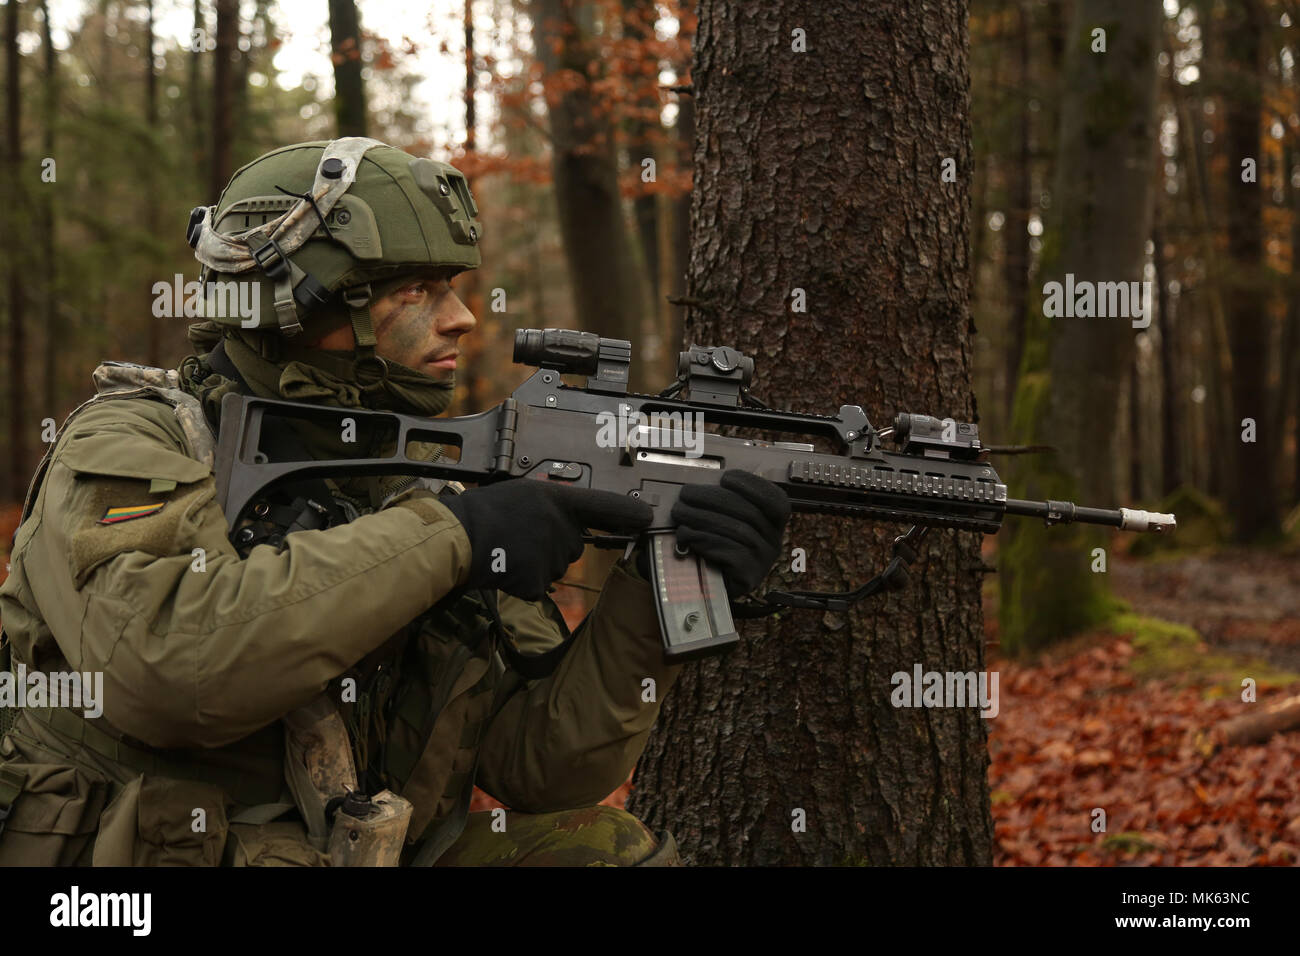 Lithuanian army Pvt. Narimantas Sausys of the Lithuanian Griffin Brigade provides security while conducting battle circulations during exercise Allied Spirit VII at the U.S. Army’s Joint Multinational Readiness Center in Hohenfels, Germany, Nov. 13, 2017. Approximately 4,050 service members from 13 nations are participating in exercise Allied Spirit VII at 7th Army Training Command’s Hohenfels Training Area, Germany, Oct. 30 to Nov. 22, 2017. Allied Spirit is a U.S. Army Europe-directed, 7ATC-conducted multinational exercise series designed to develop and enhance NATO and key partner’s interop Stock Photo